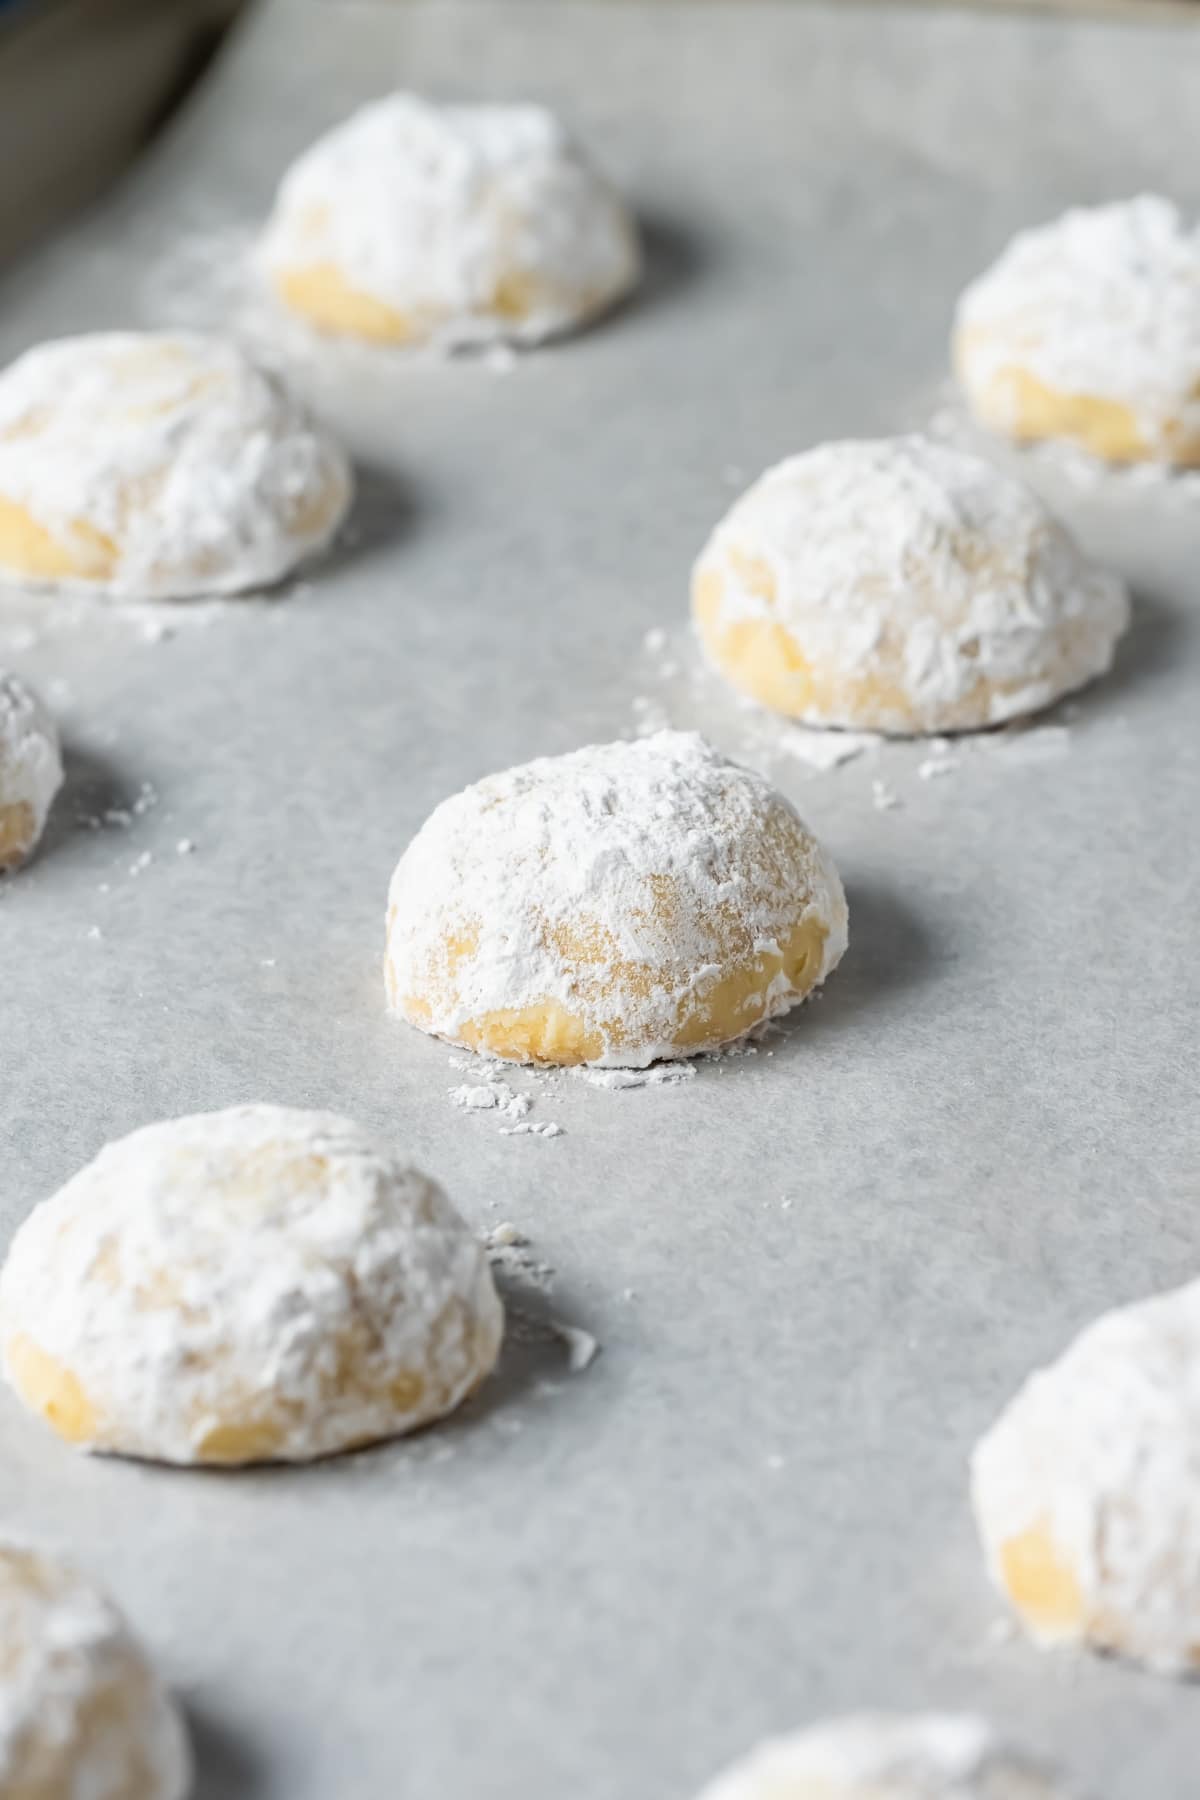 Vegan snowball cookies on a parchment lined baking tray.